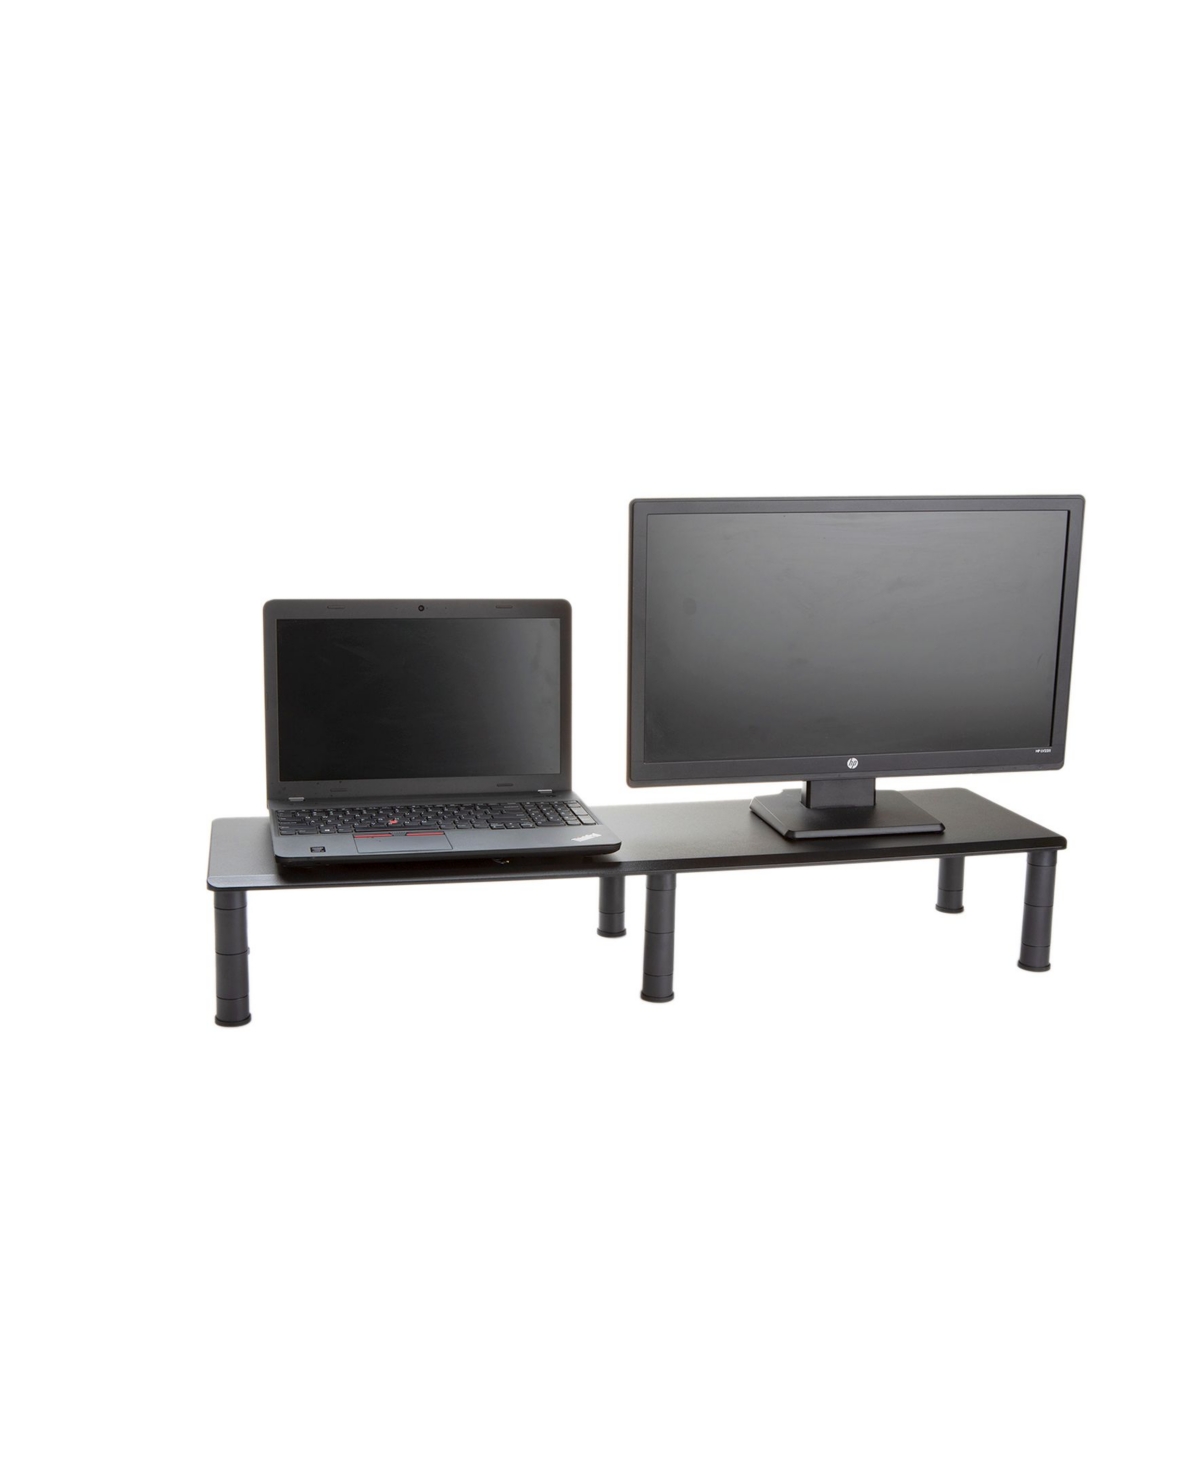 Large Dual Monitor Stand For Computer Screens - Black